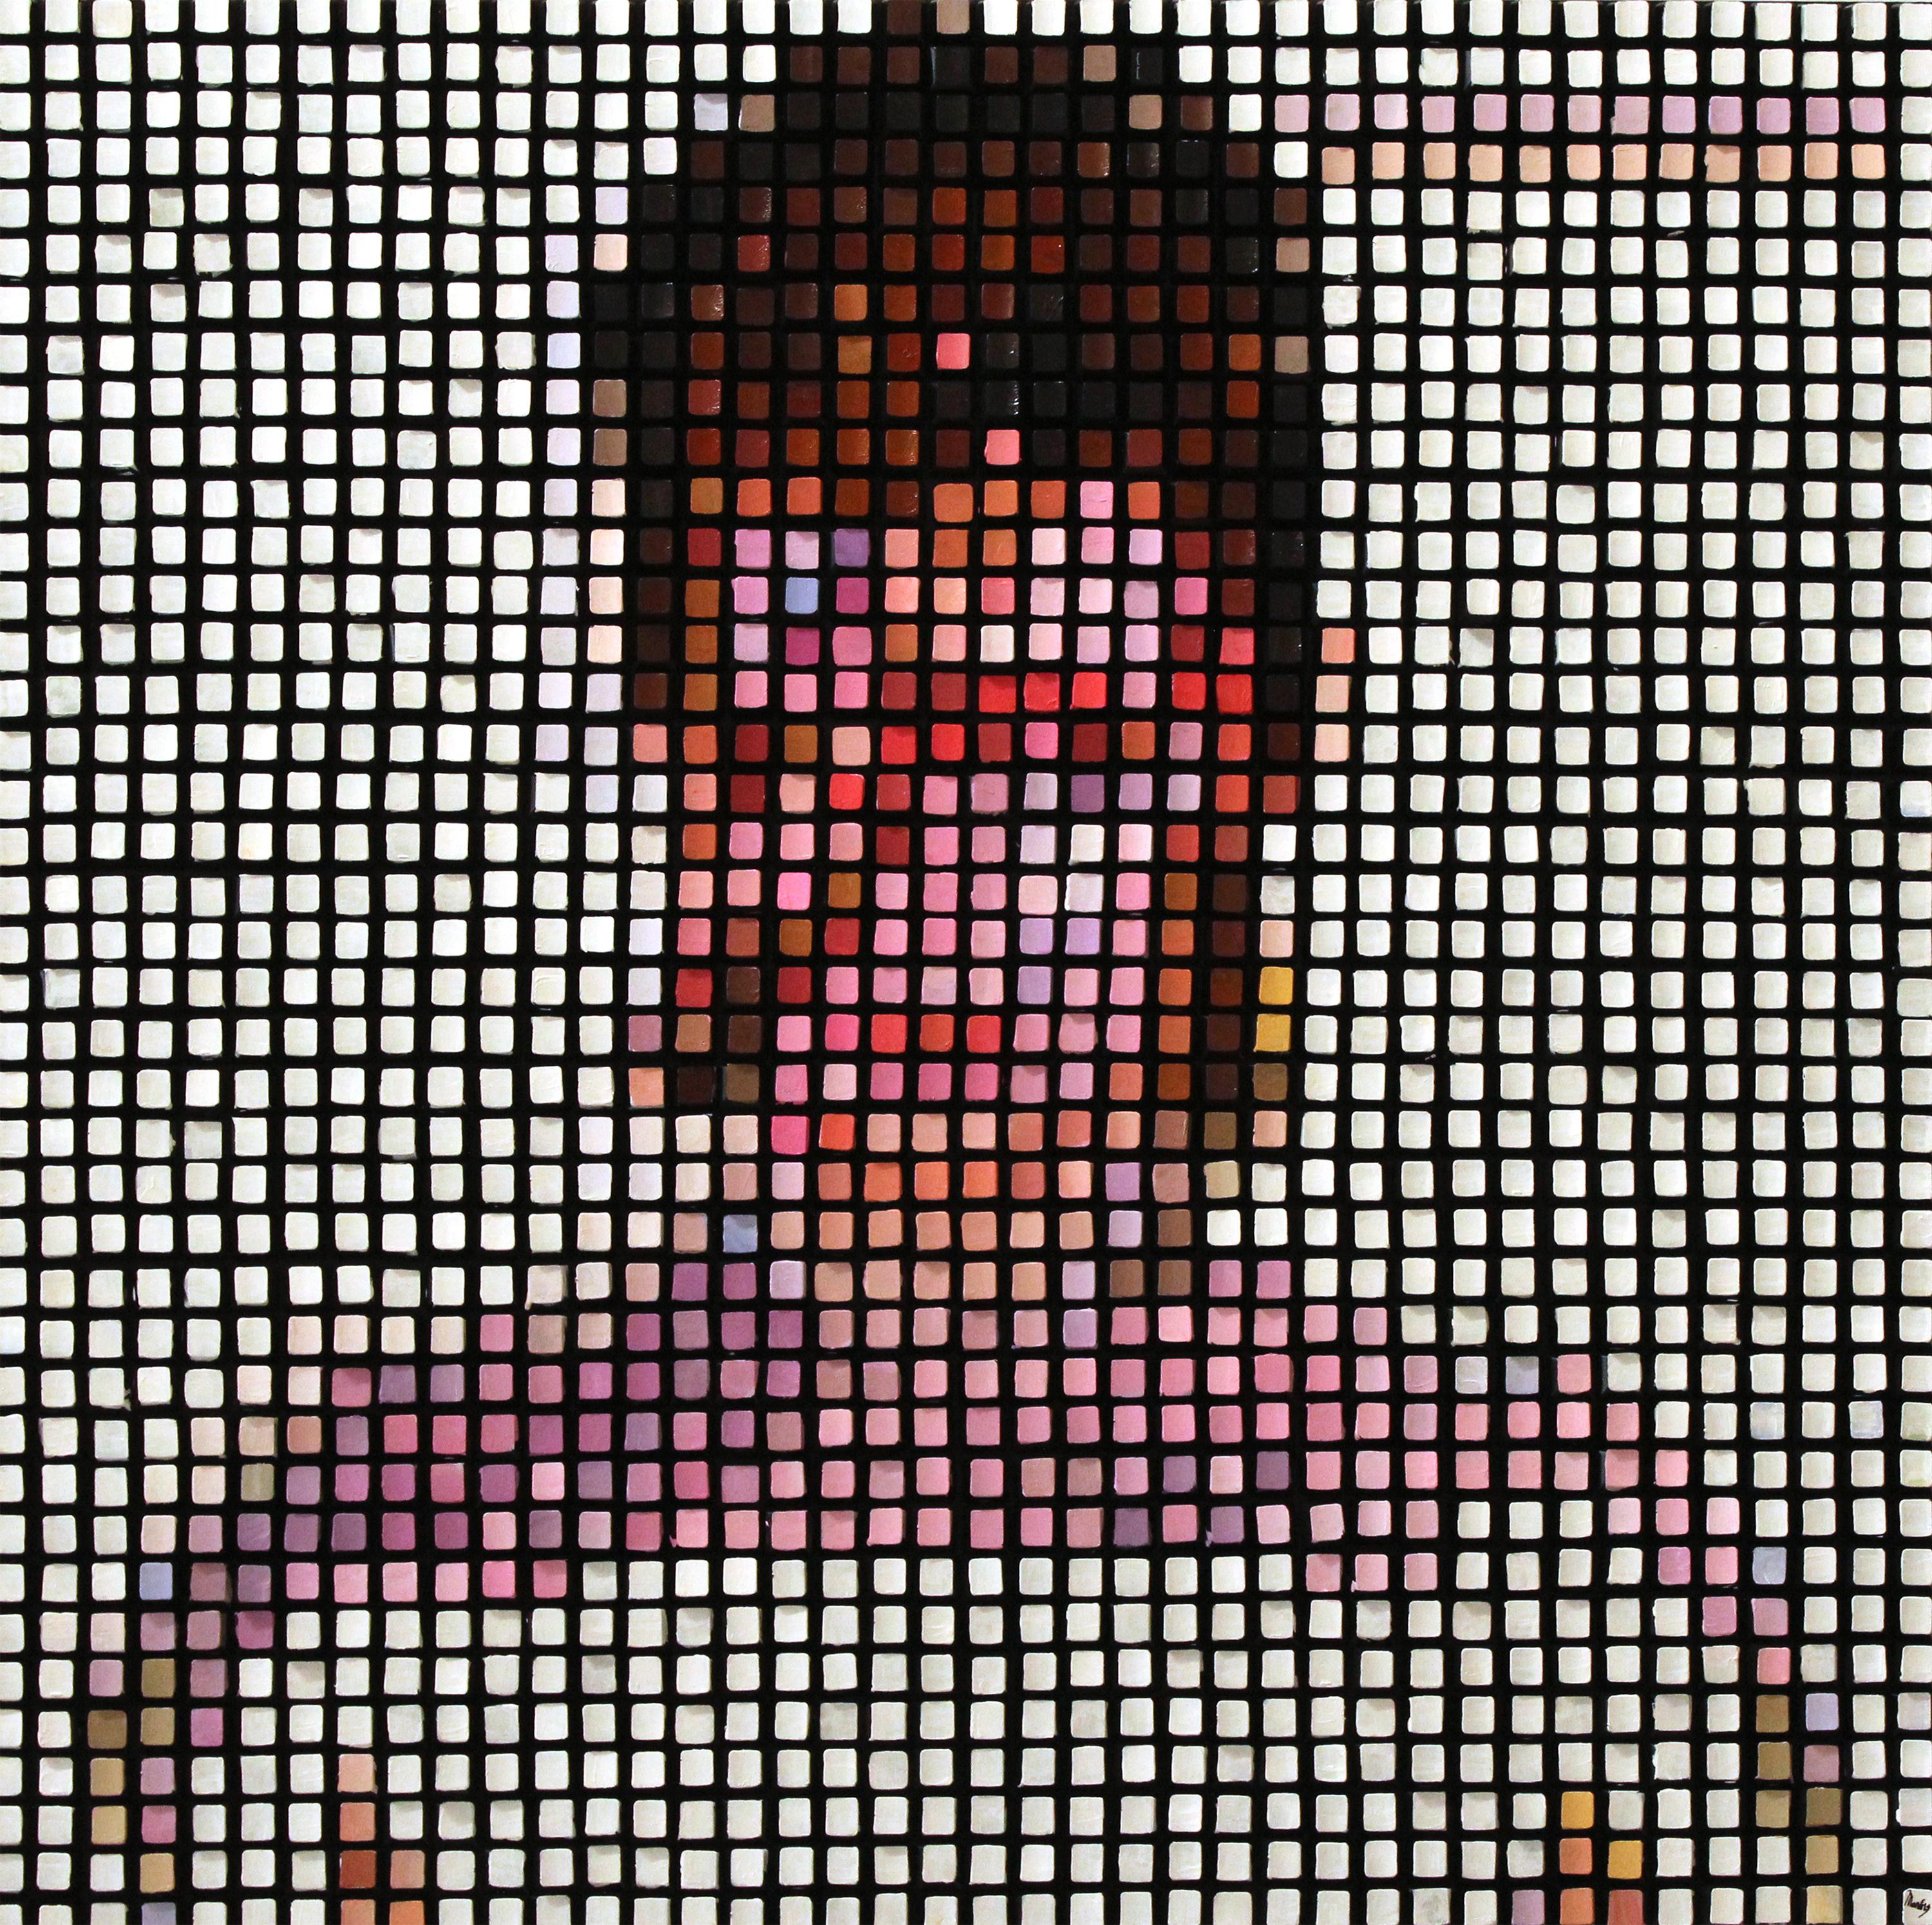 Pixel Remaster Series: Bowie, Acrylic and Keyboard Keys on Panel